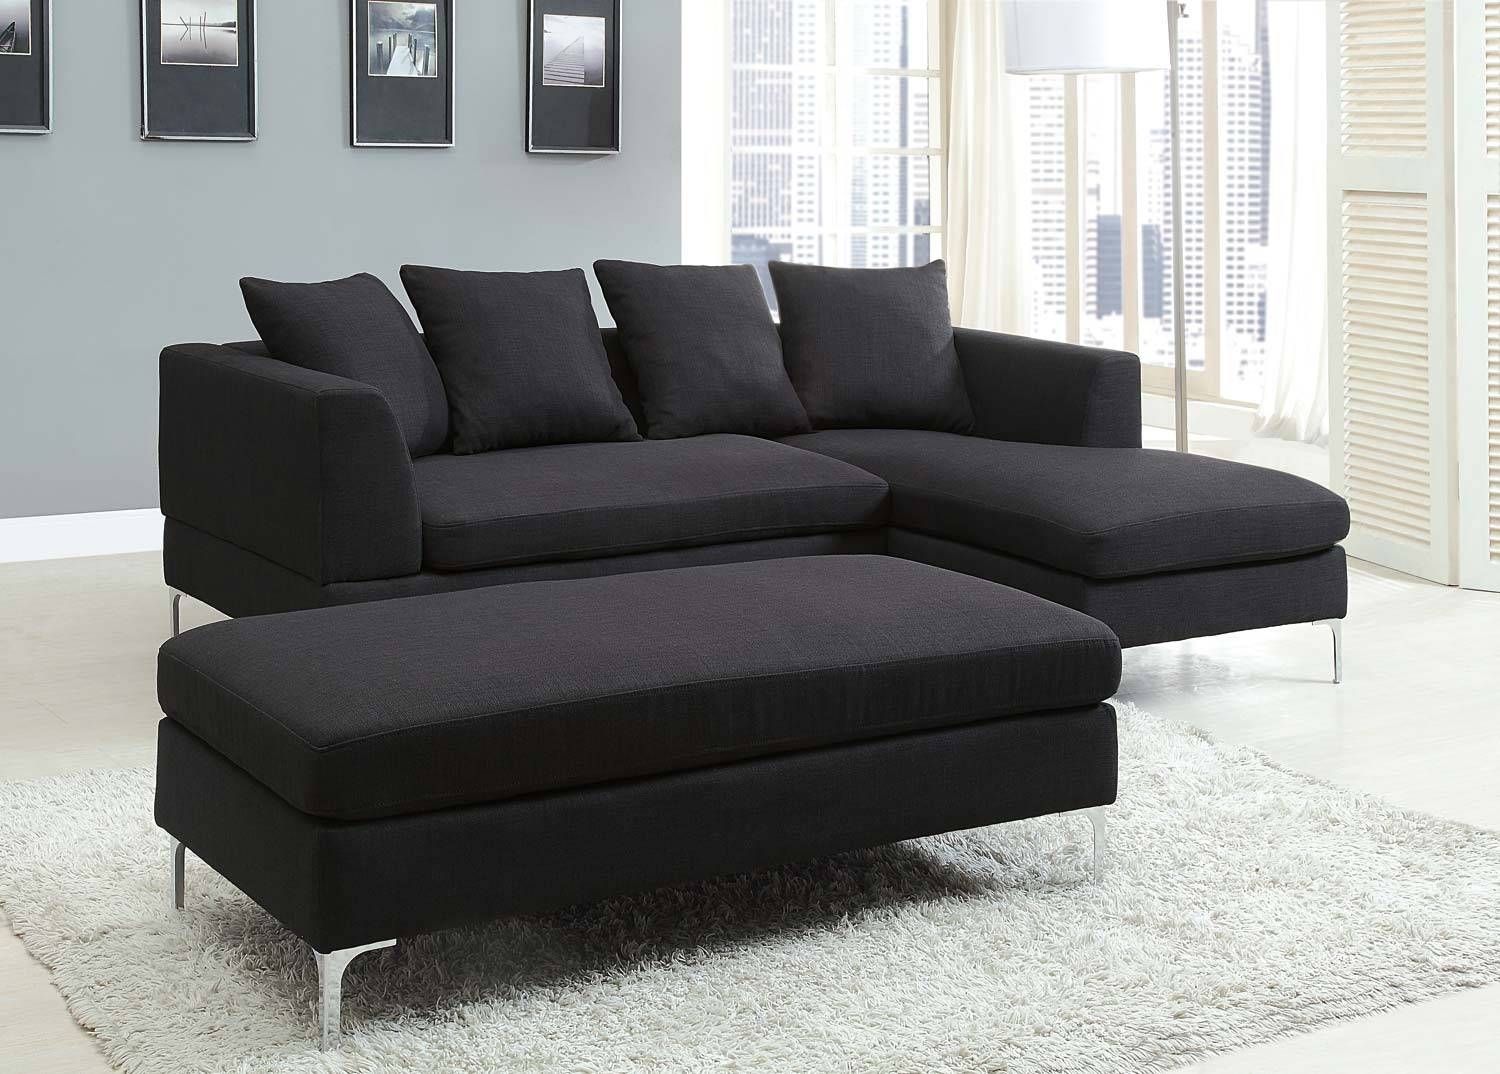 Furniture Home: Cozy Reclining Sectional Sofas Microfiber 97 With In Black Microfiber Sectional Sofas (View 8 of 15)